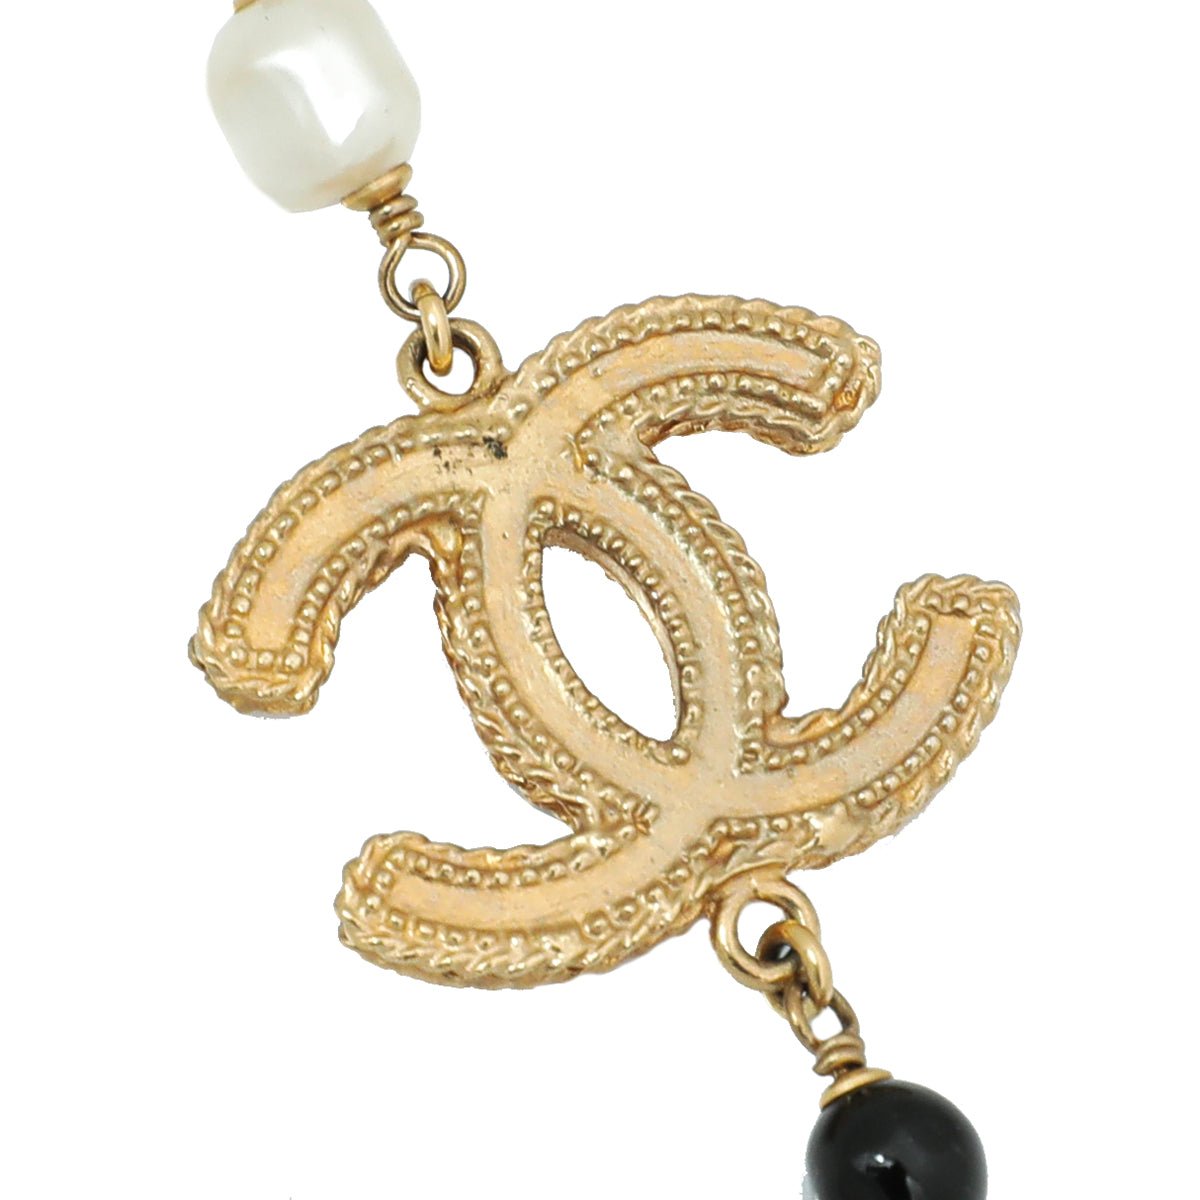 Chanel - Chanel Bicolor CC Pearl Long Necklace | The Closet